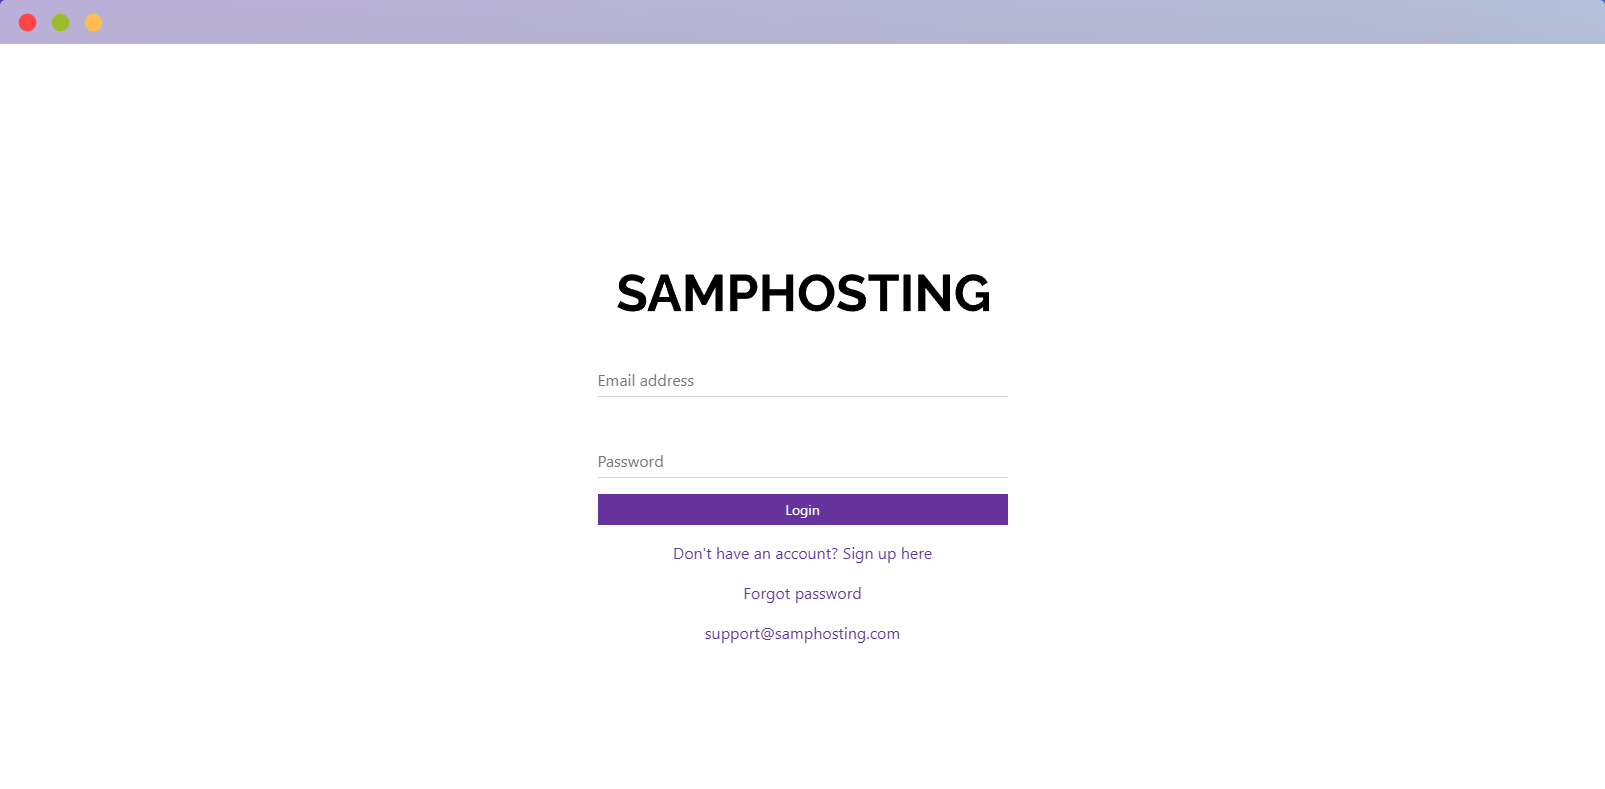 Getting started with SAMP Hosting